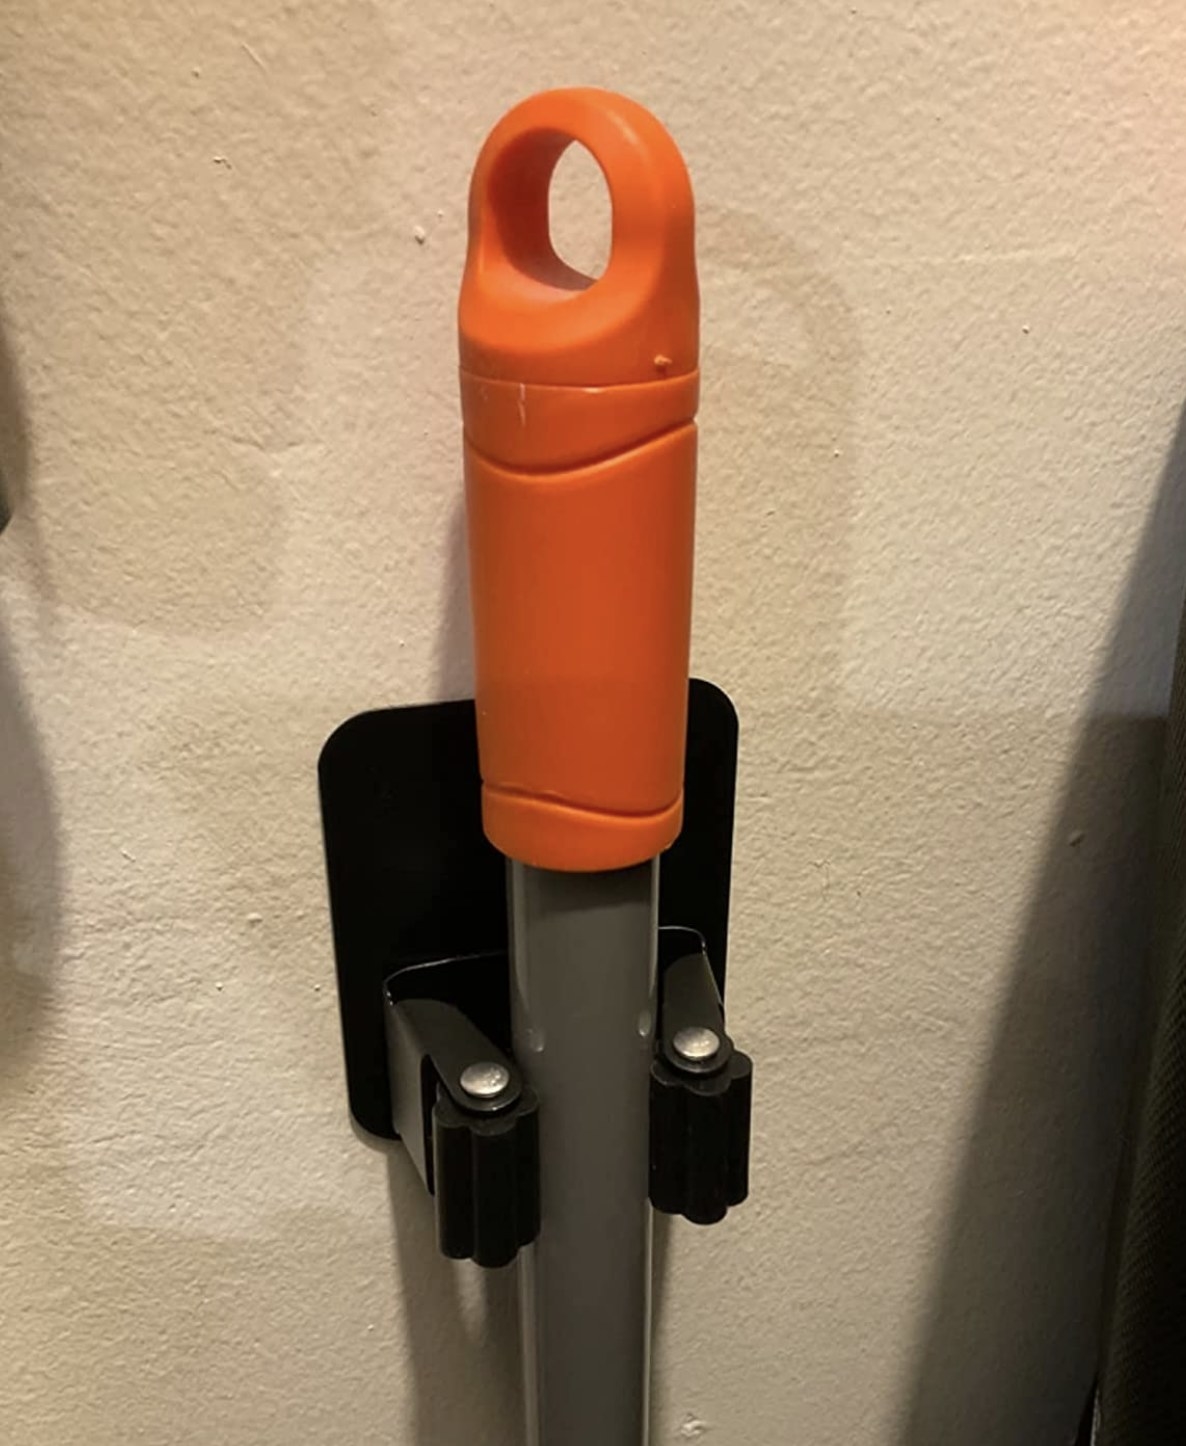 reviewer photo showing the broom holder affixed to their wall holding and orange broomstick with ease